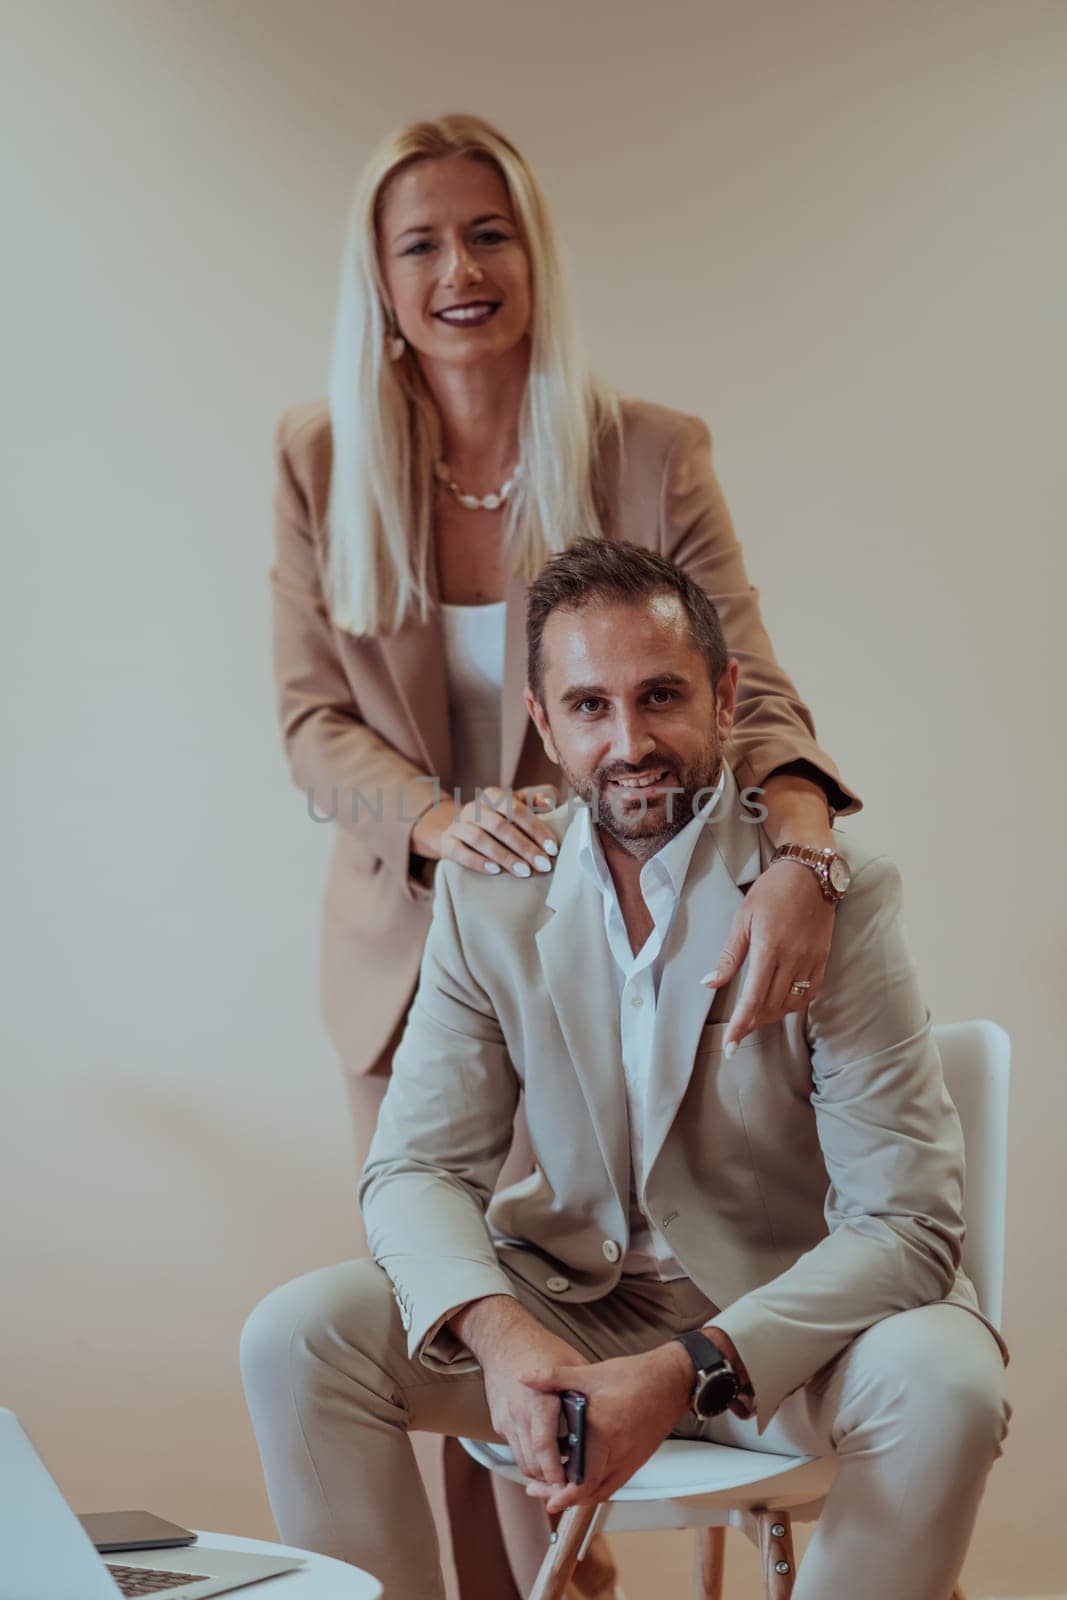 A business couple posing for a photograph together against a beige backdrop, capturing their professional partnership and creating a timeless image of unity and success. by dotshock